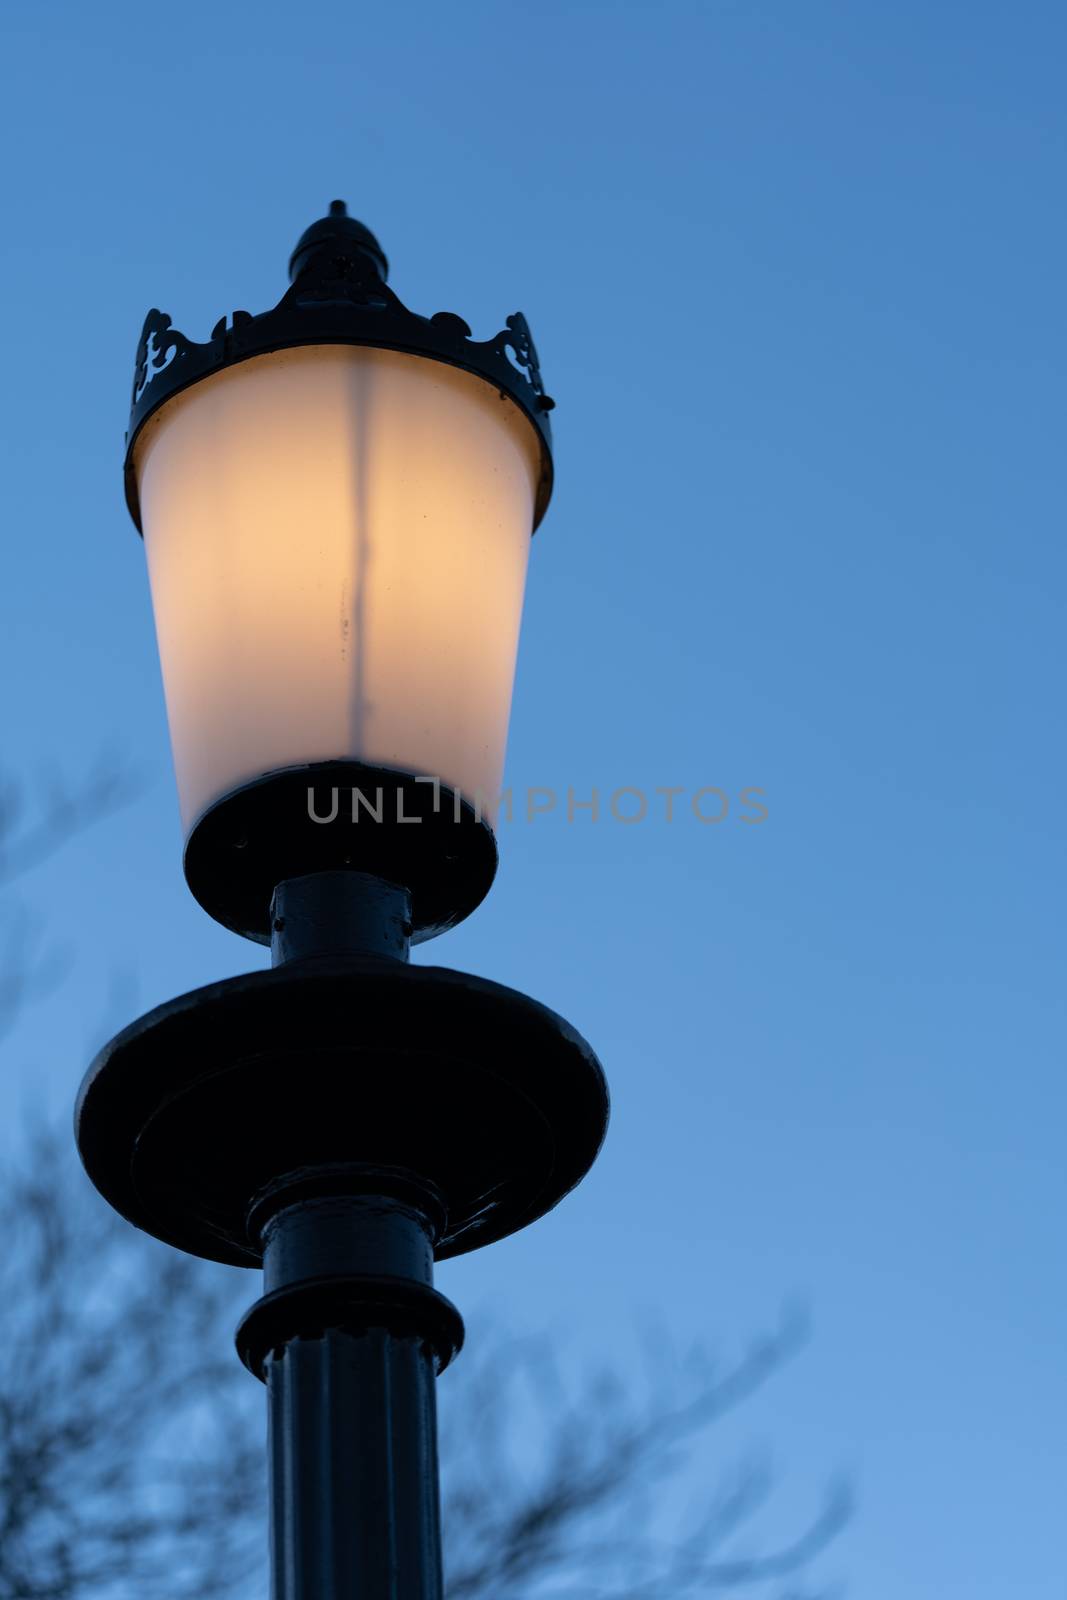 Old Fashioned British Street Lamp by samULvisuals